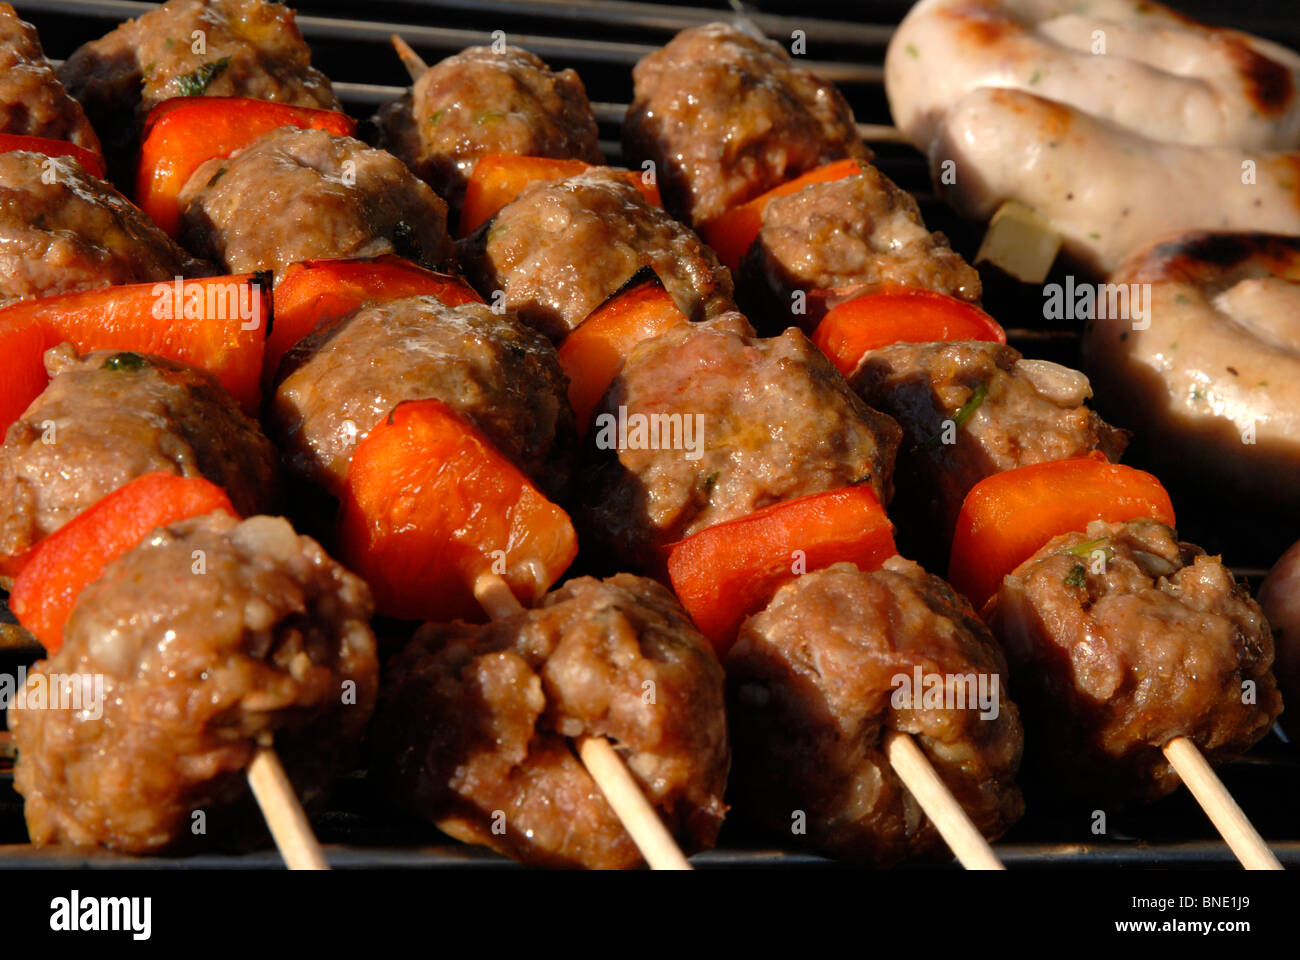 Lamb kebabs on barbeque Stock Photo